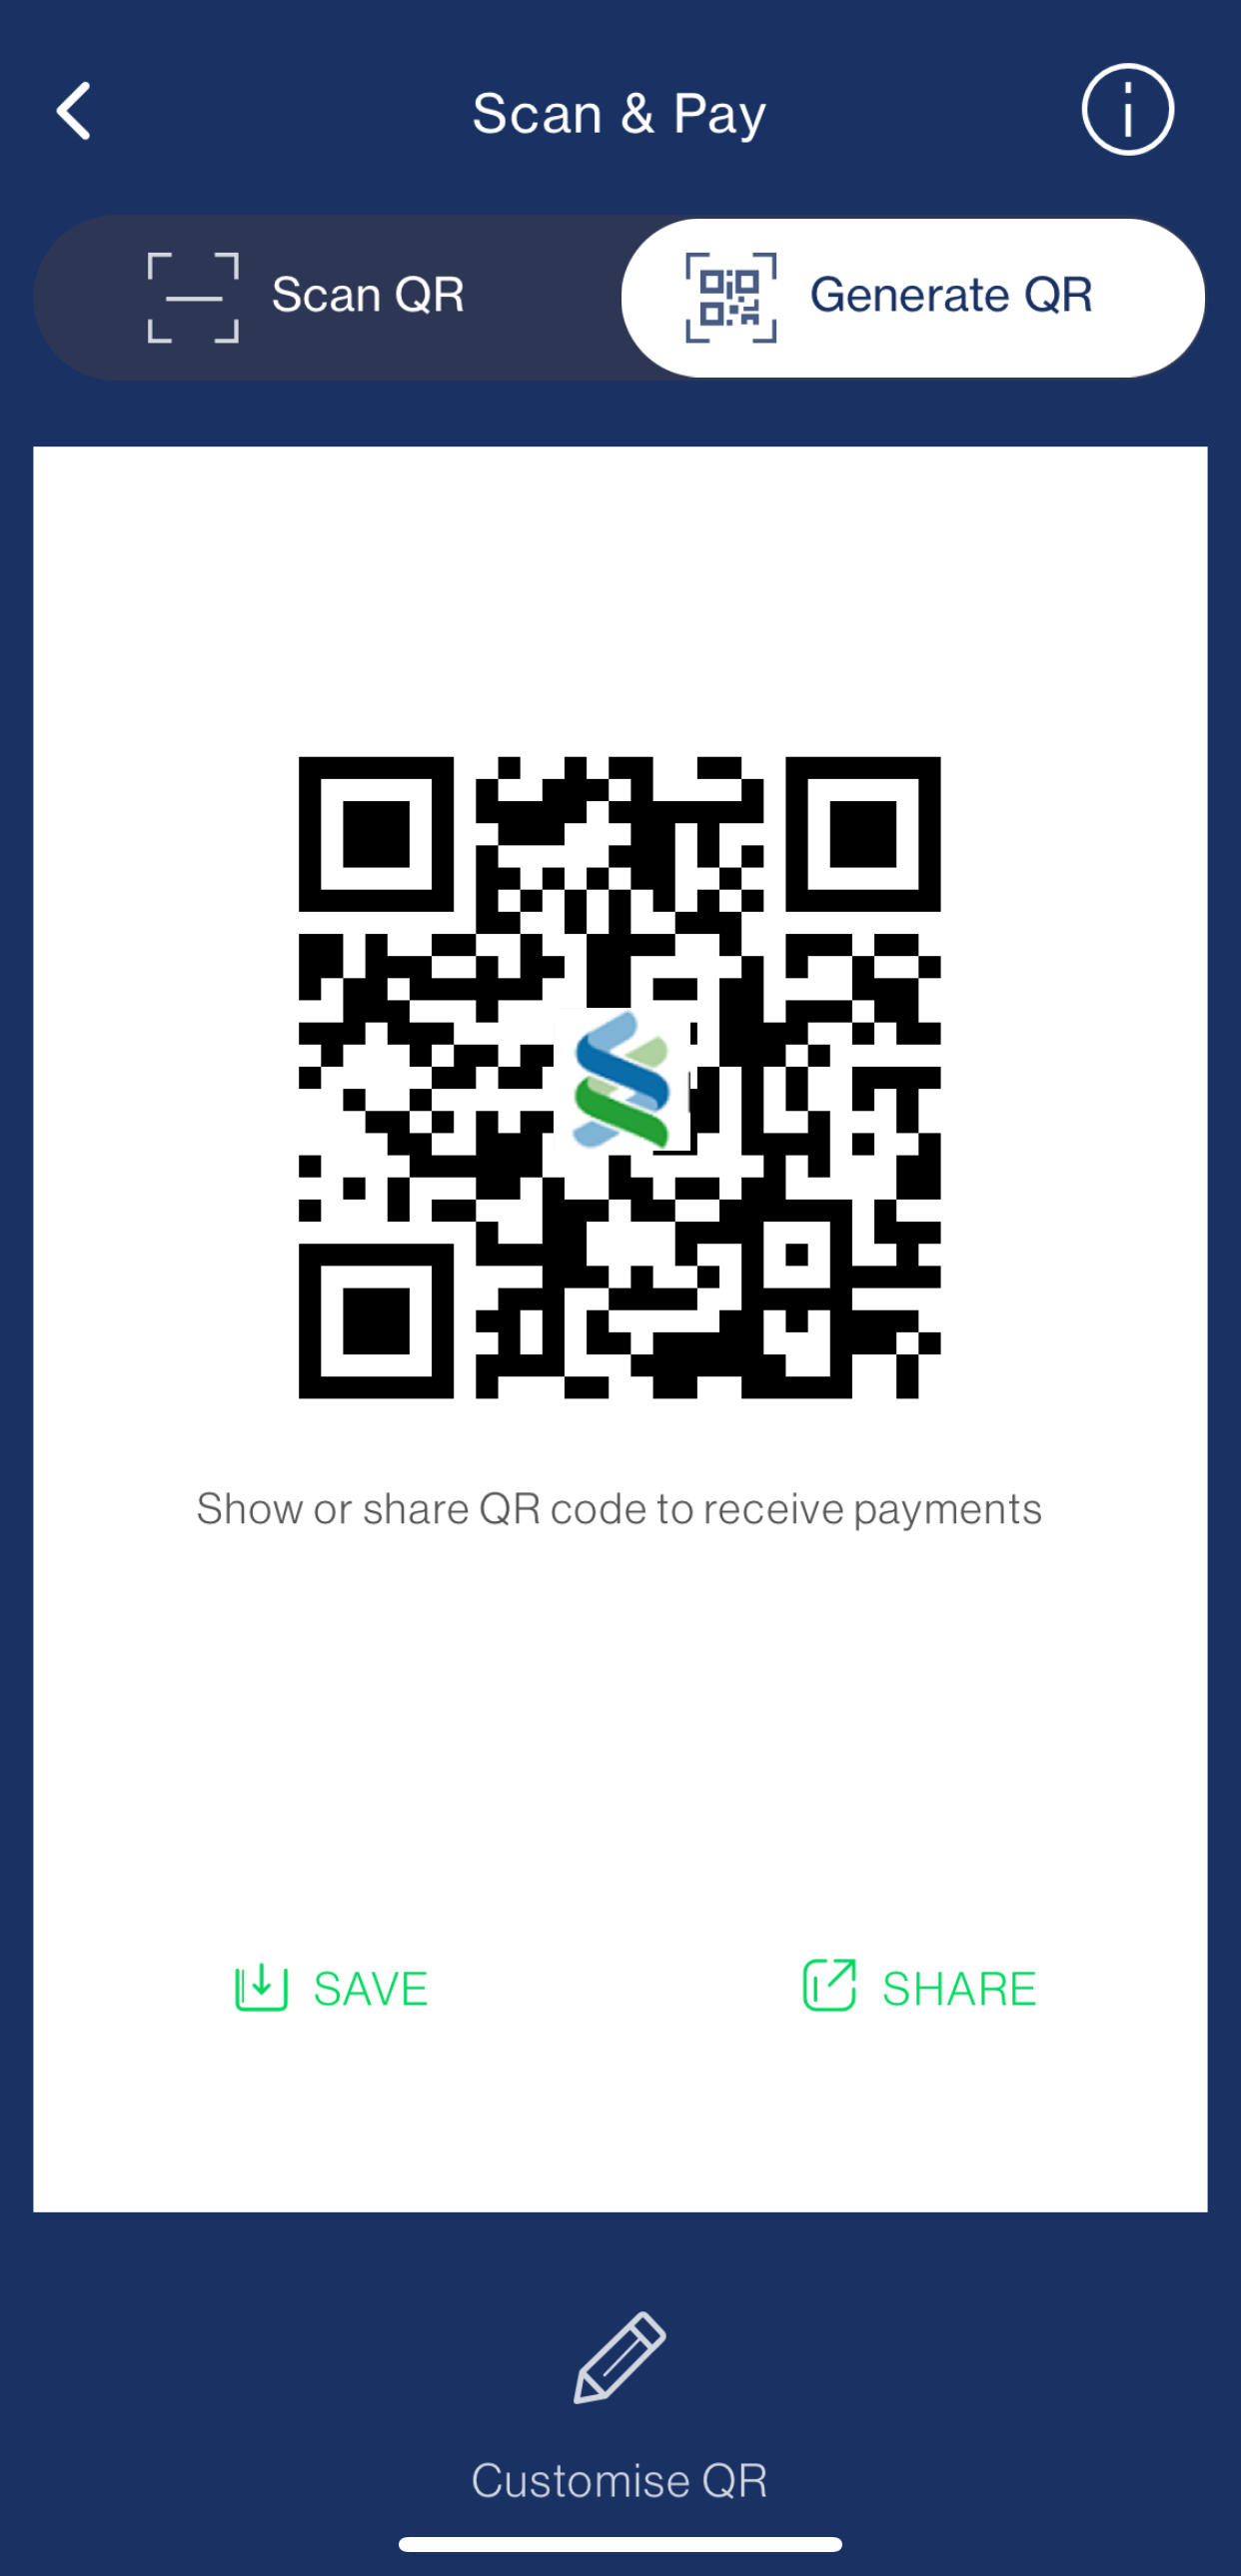 Click Generate QR to share, or customise QR with the money amount at the bottom